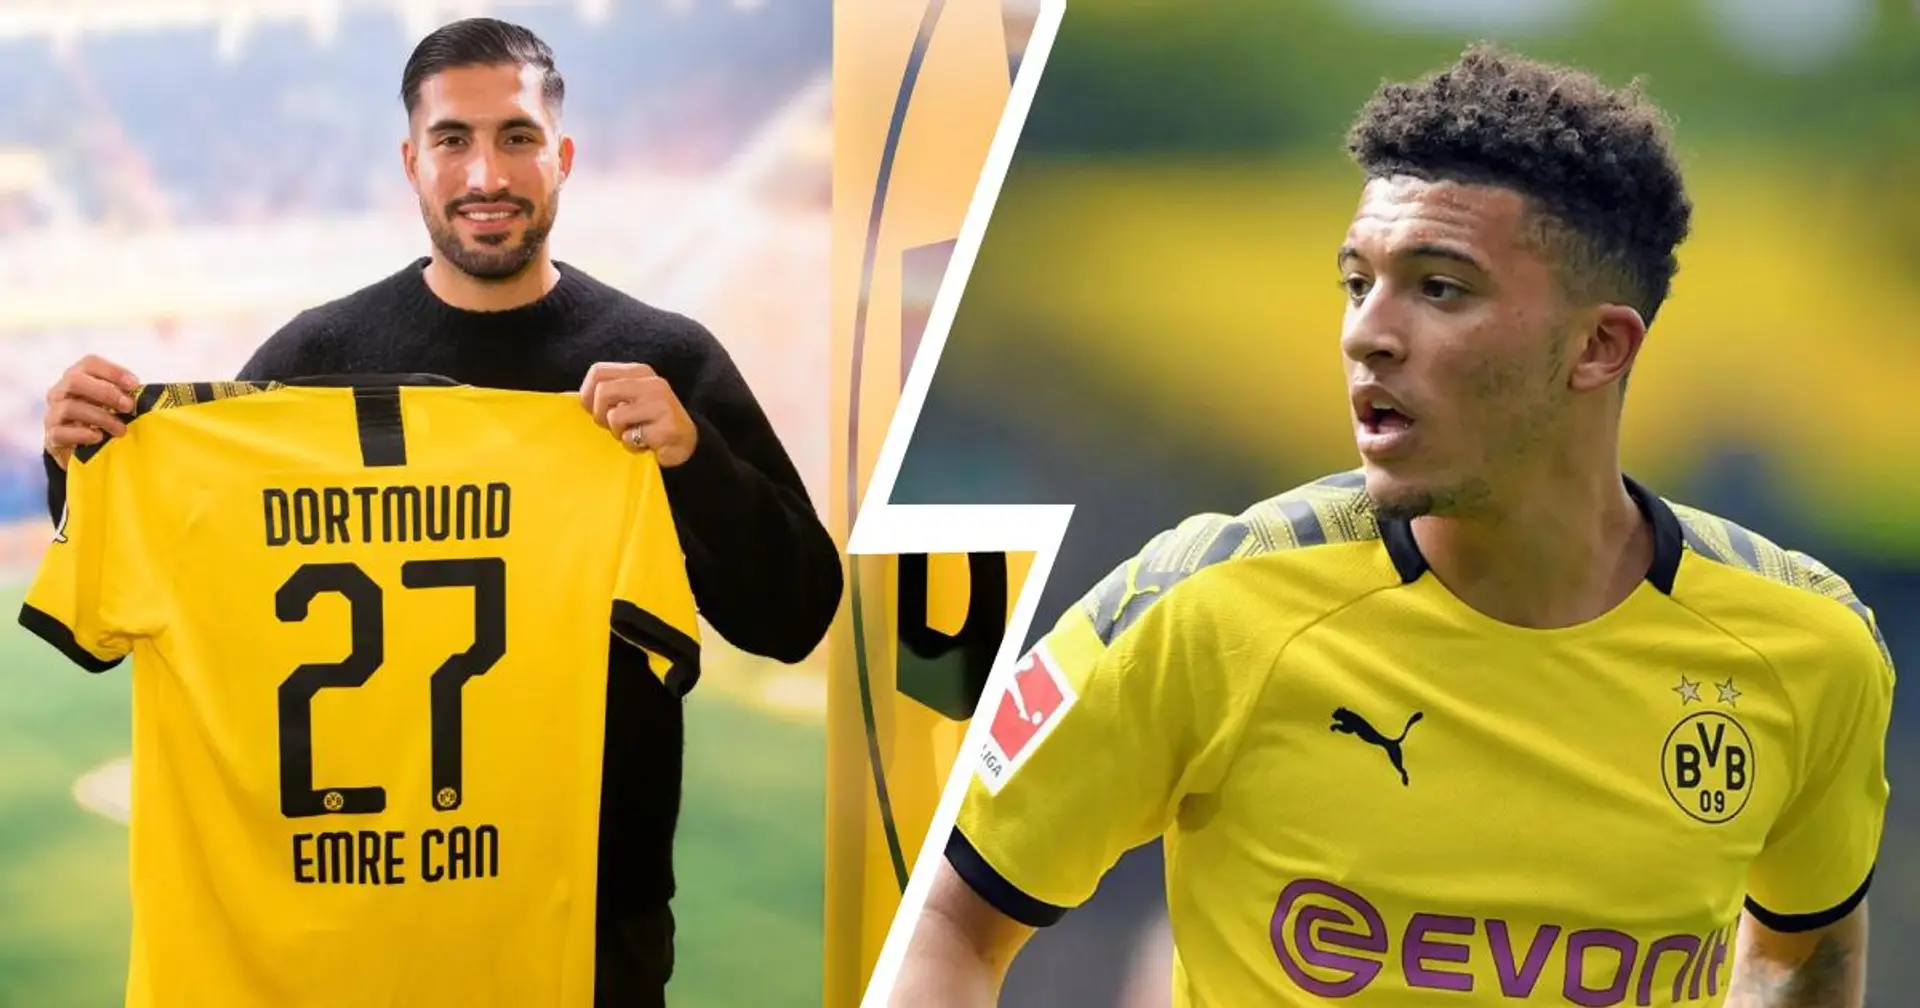 'I tell him: stay here and let's play together forever': Emre Can says there is no reason for Sancho to leave Dortmund